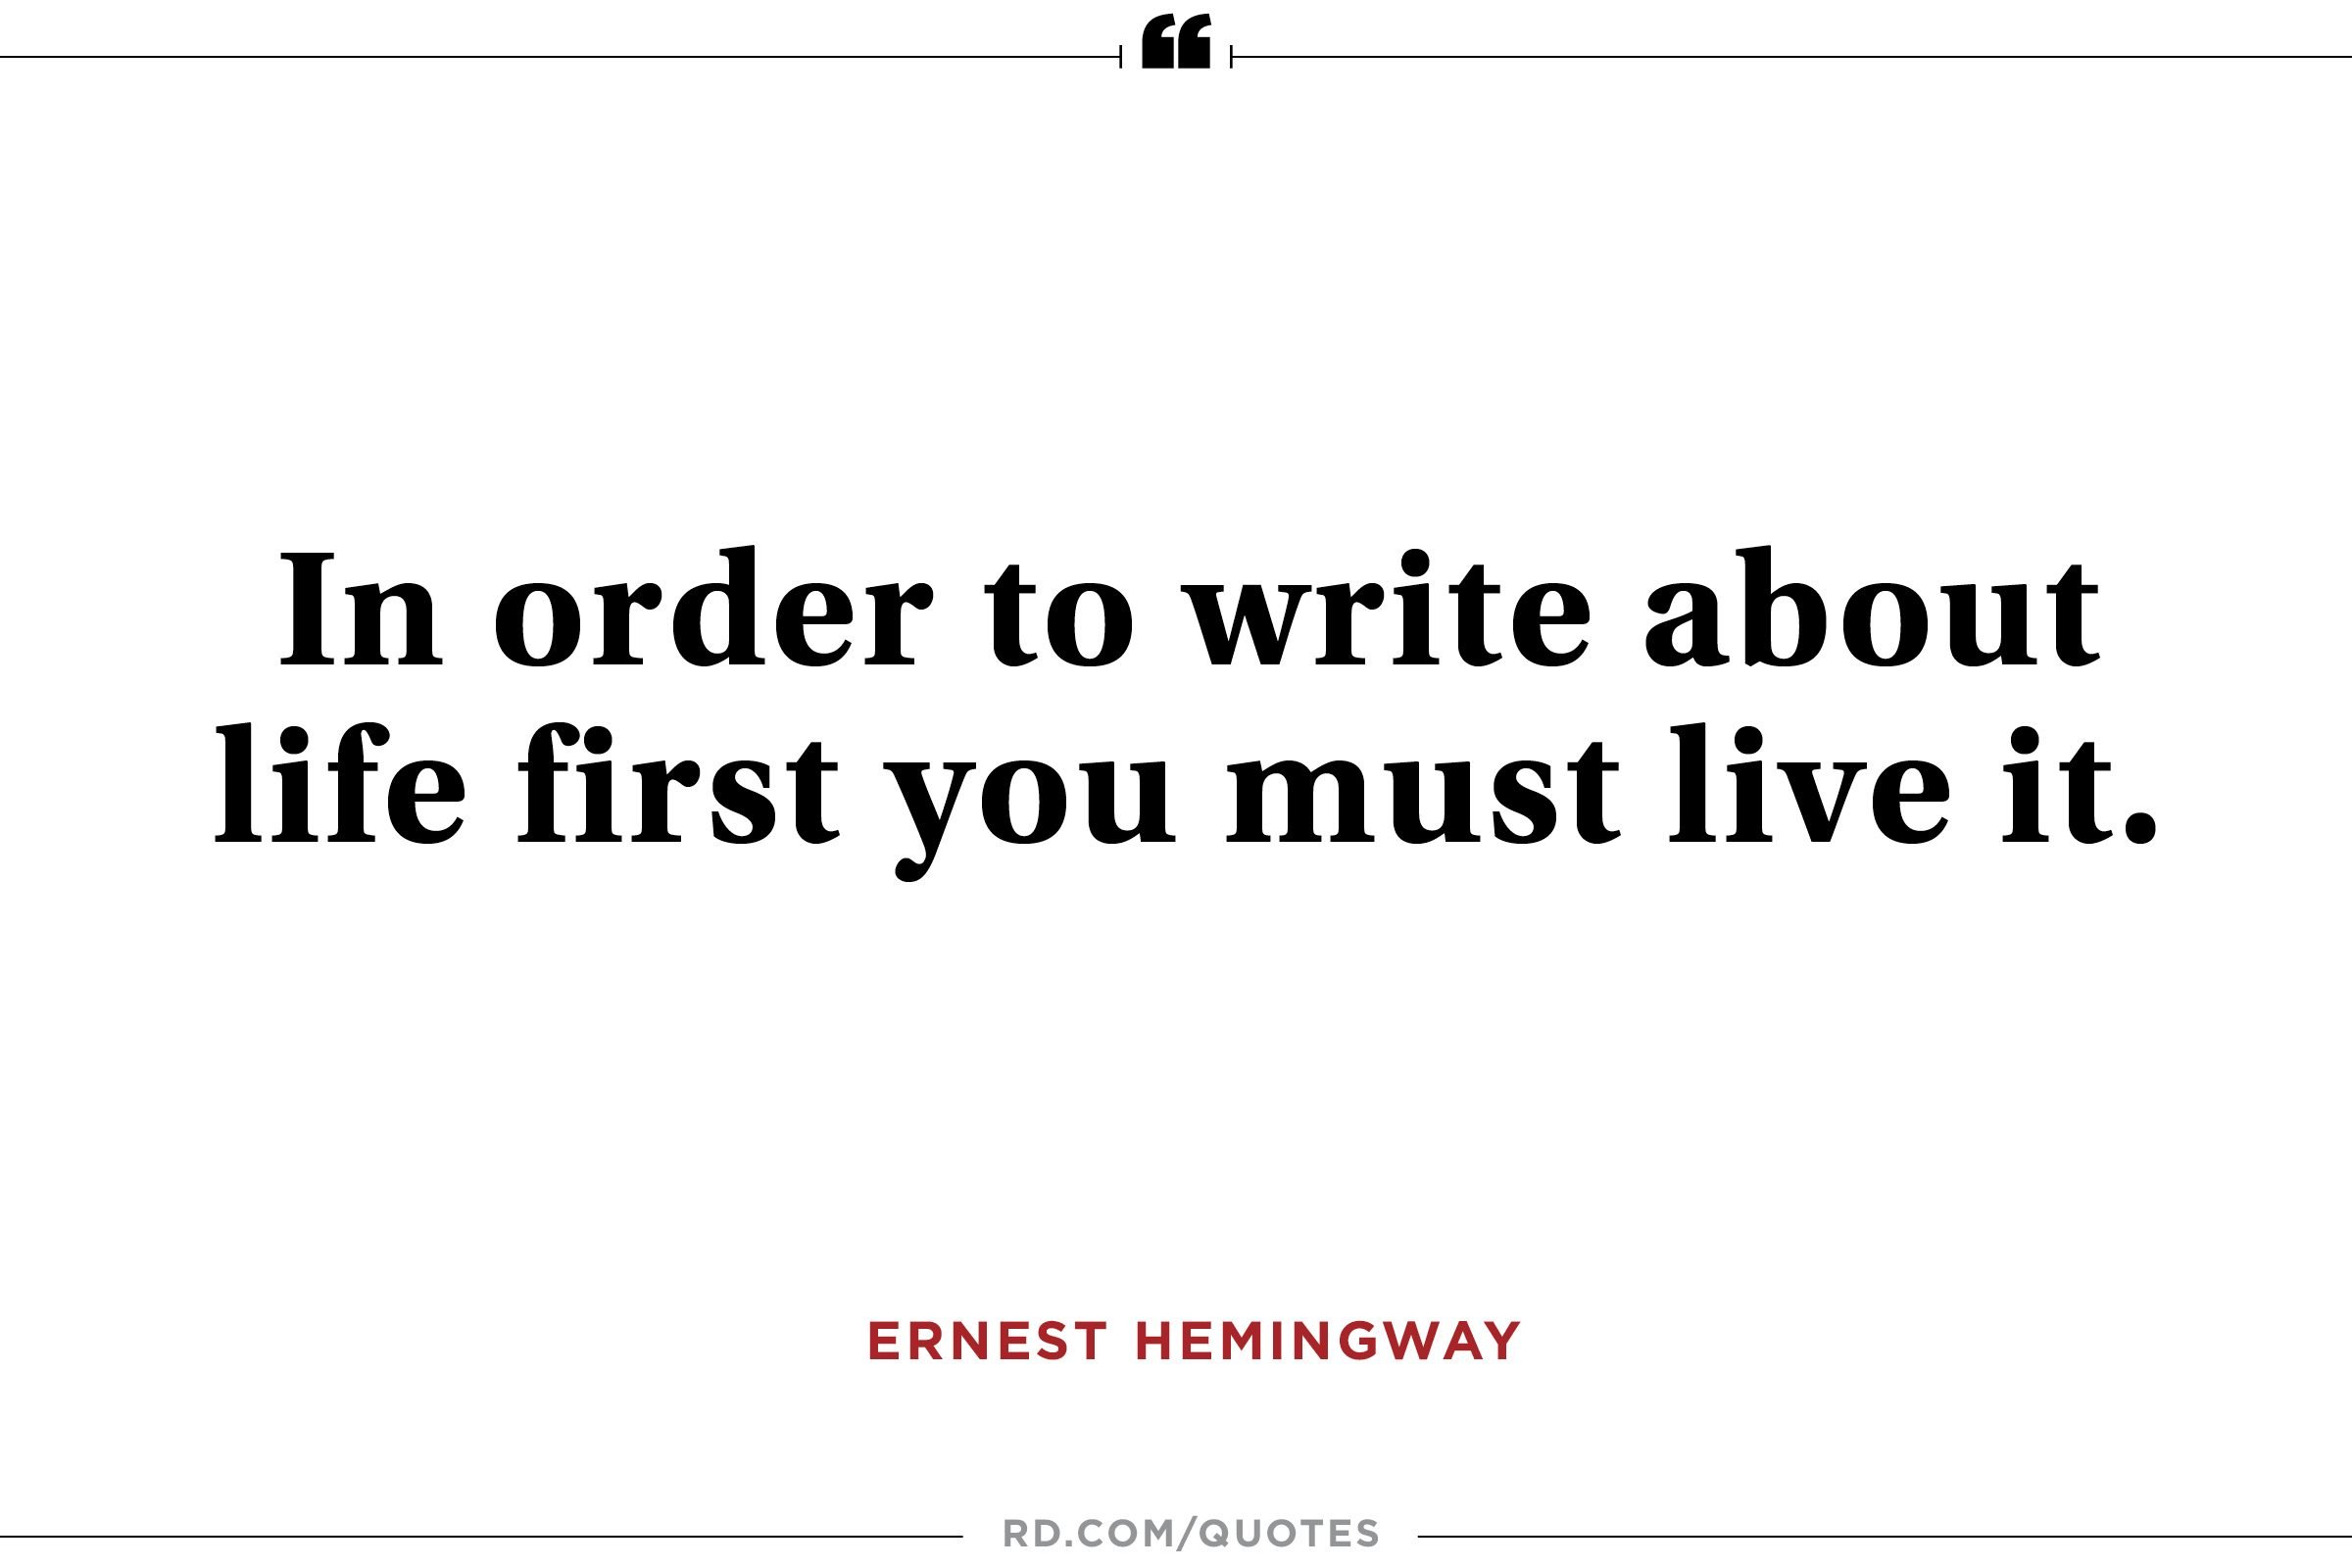 funny college final exam quotes 12 inspiring ernest hemingway quotes reader u0027s digest